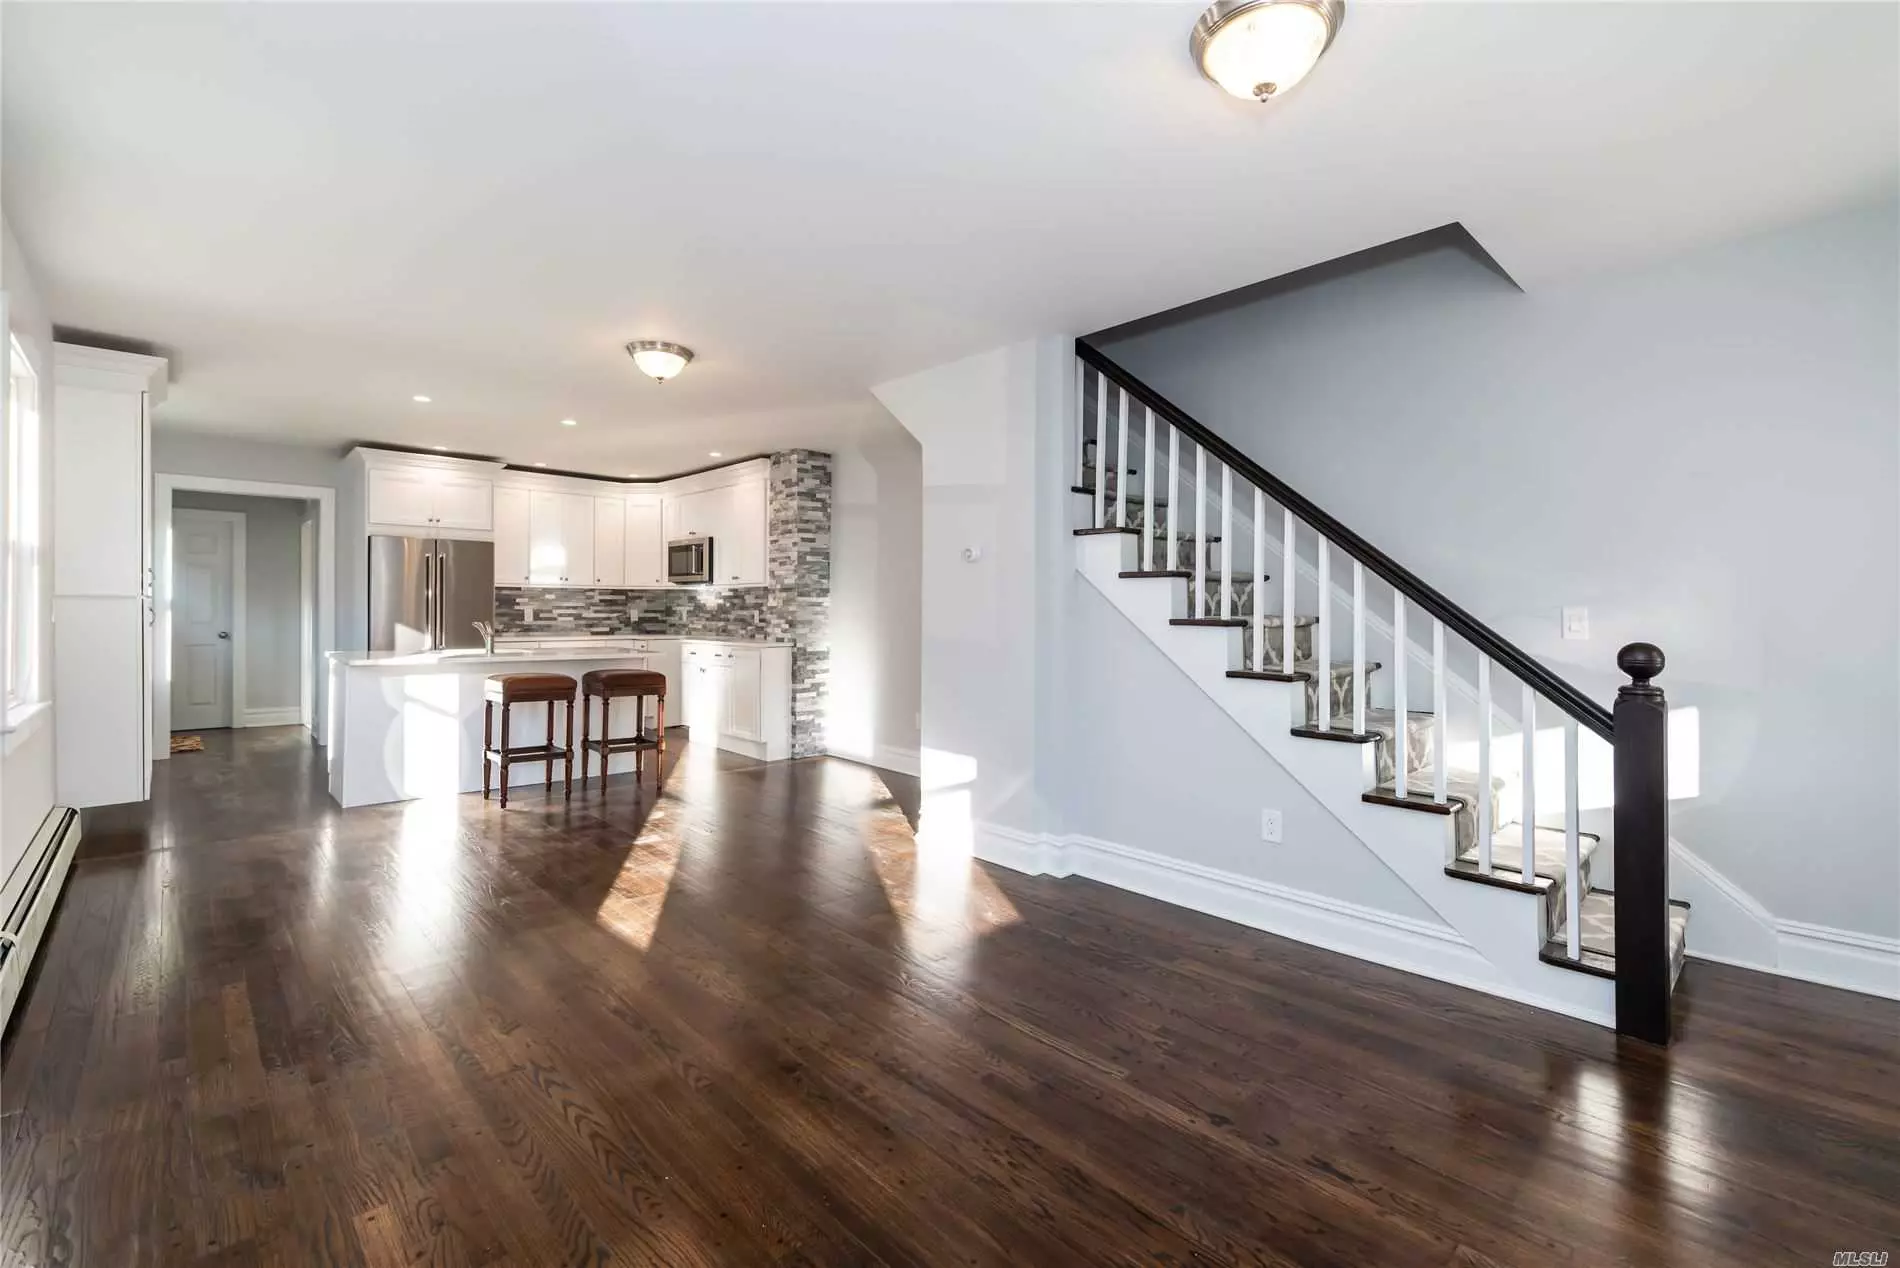 SIDE BY SIDE LARGE RENTAL. COMPLETELY RENVOATED! NEW EVERYTHING! RADIANT HEAT IN MASTER BATH, NEW APPLLIANCES, HARD WOOD FLOORS, WALK UP ATTIC AND LARGE BASEMENT WITH WASHER/DRIER, WINE COOLER AND SMALL EXTRA FREEZER..